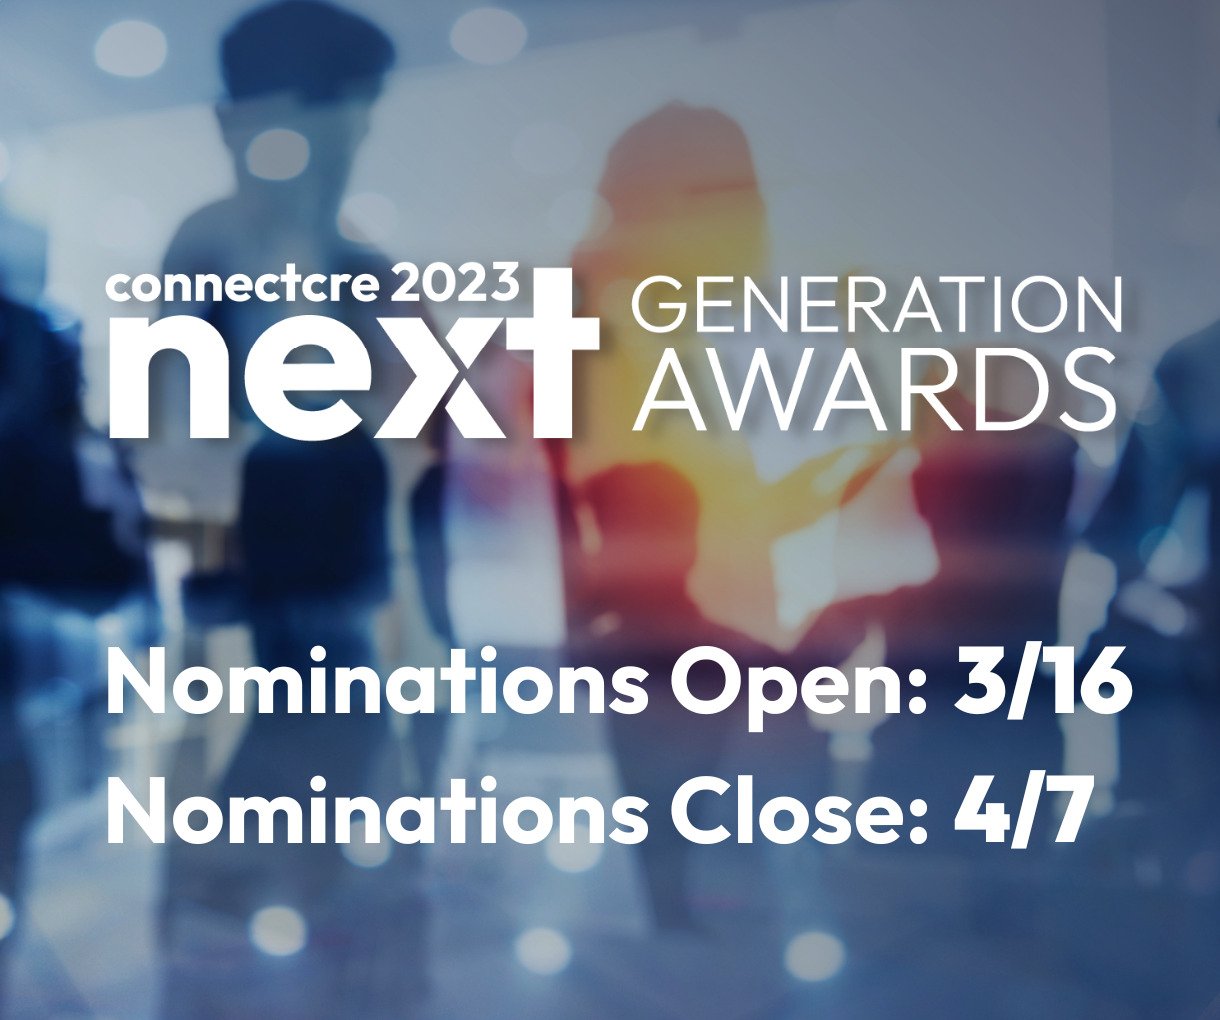 2023 Next Generation Awards Connect CRE